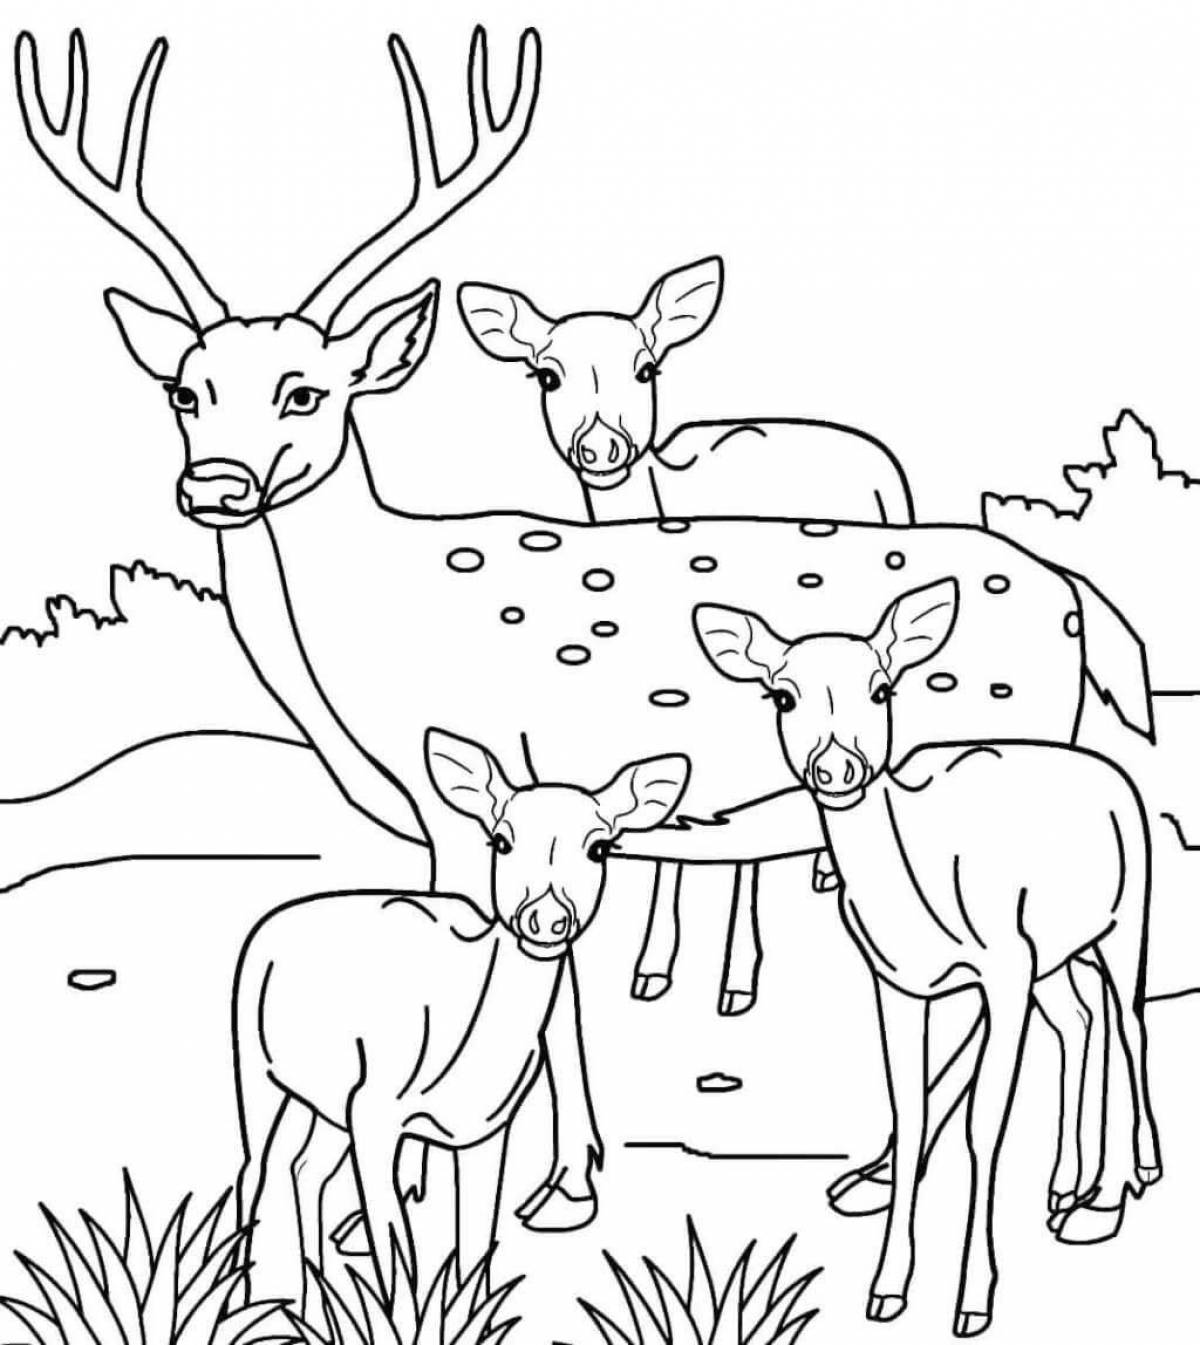 Adorable deer coloring book for kids 6-7 years old